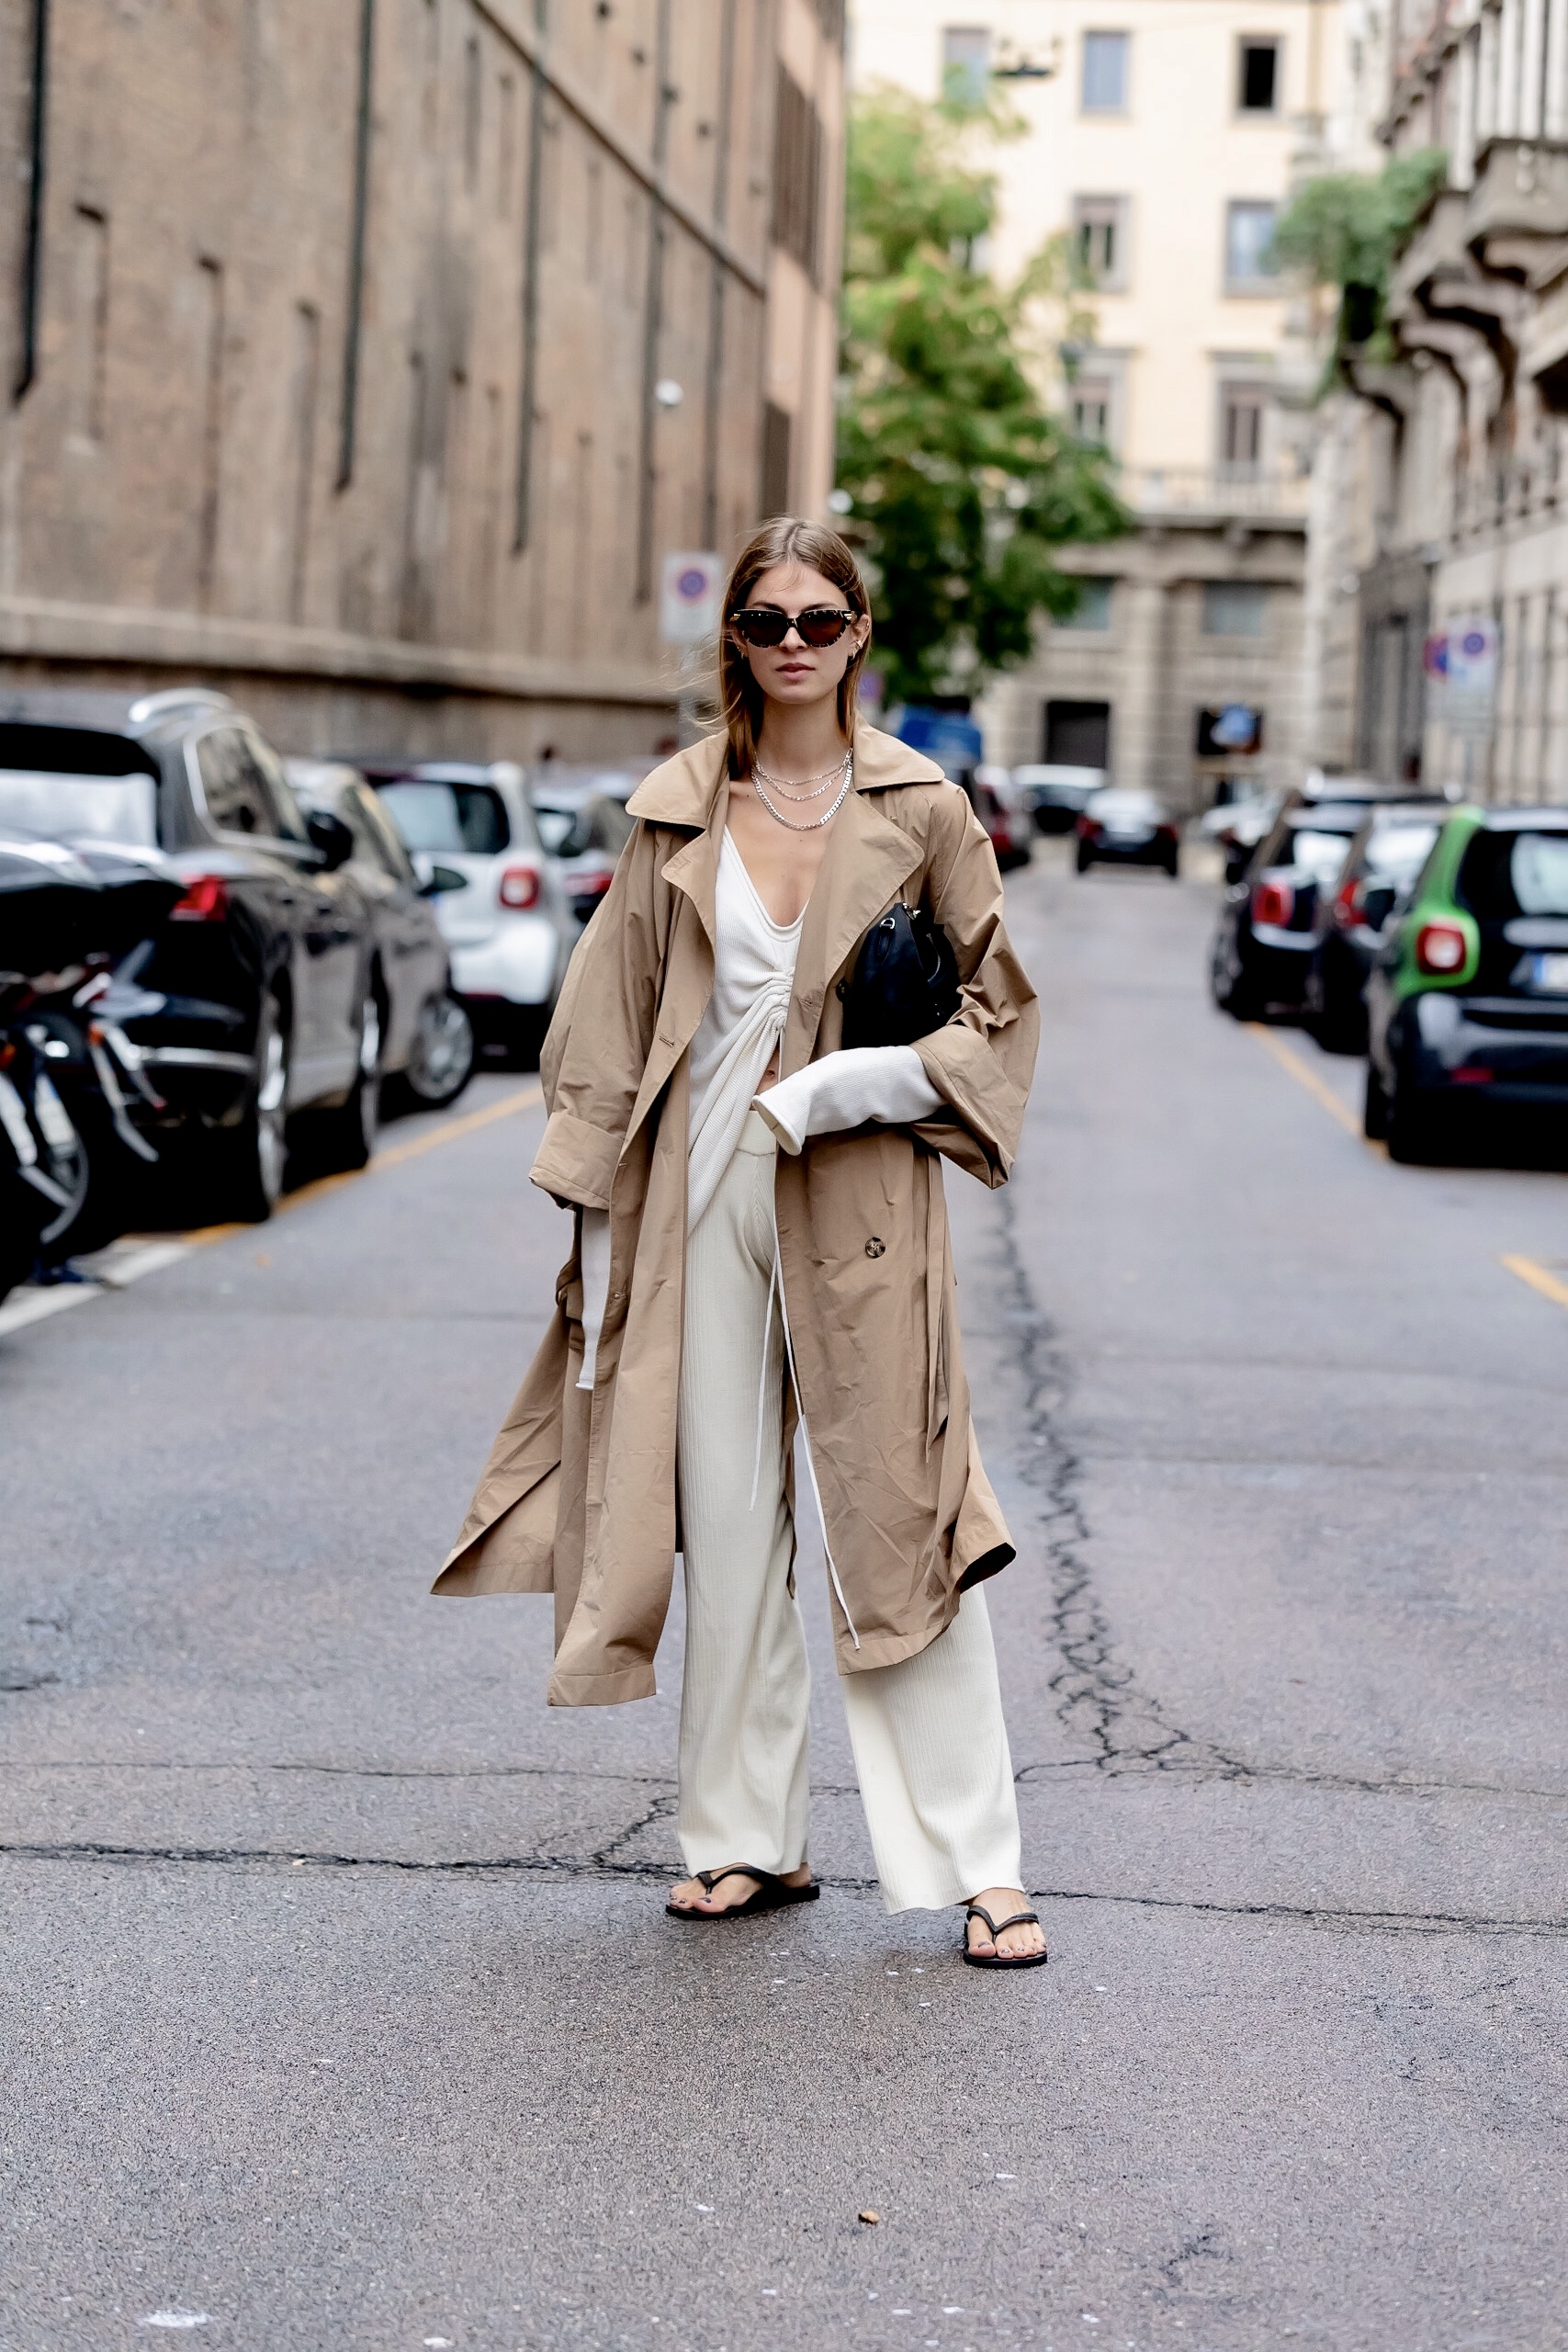 The Best Street Style Looks from Milan Fashion Week SS21